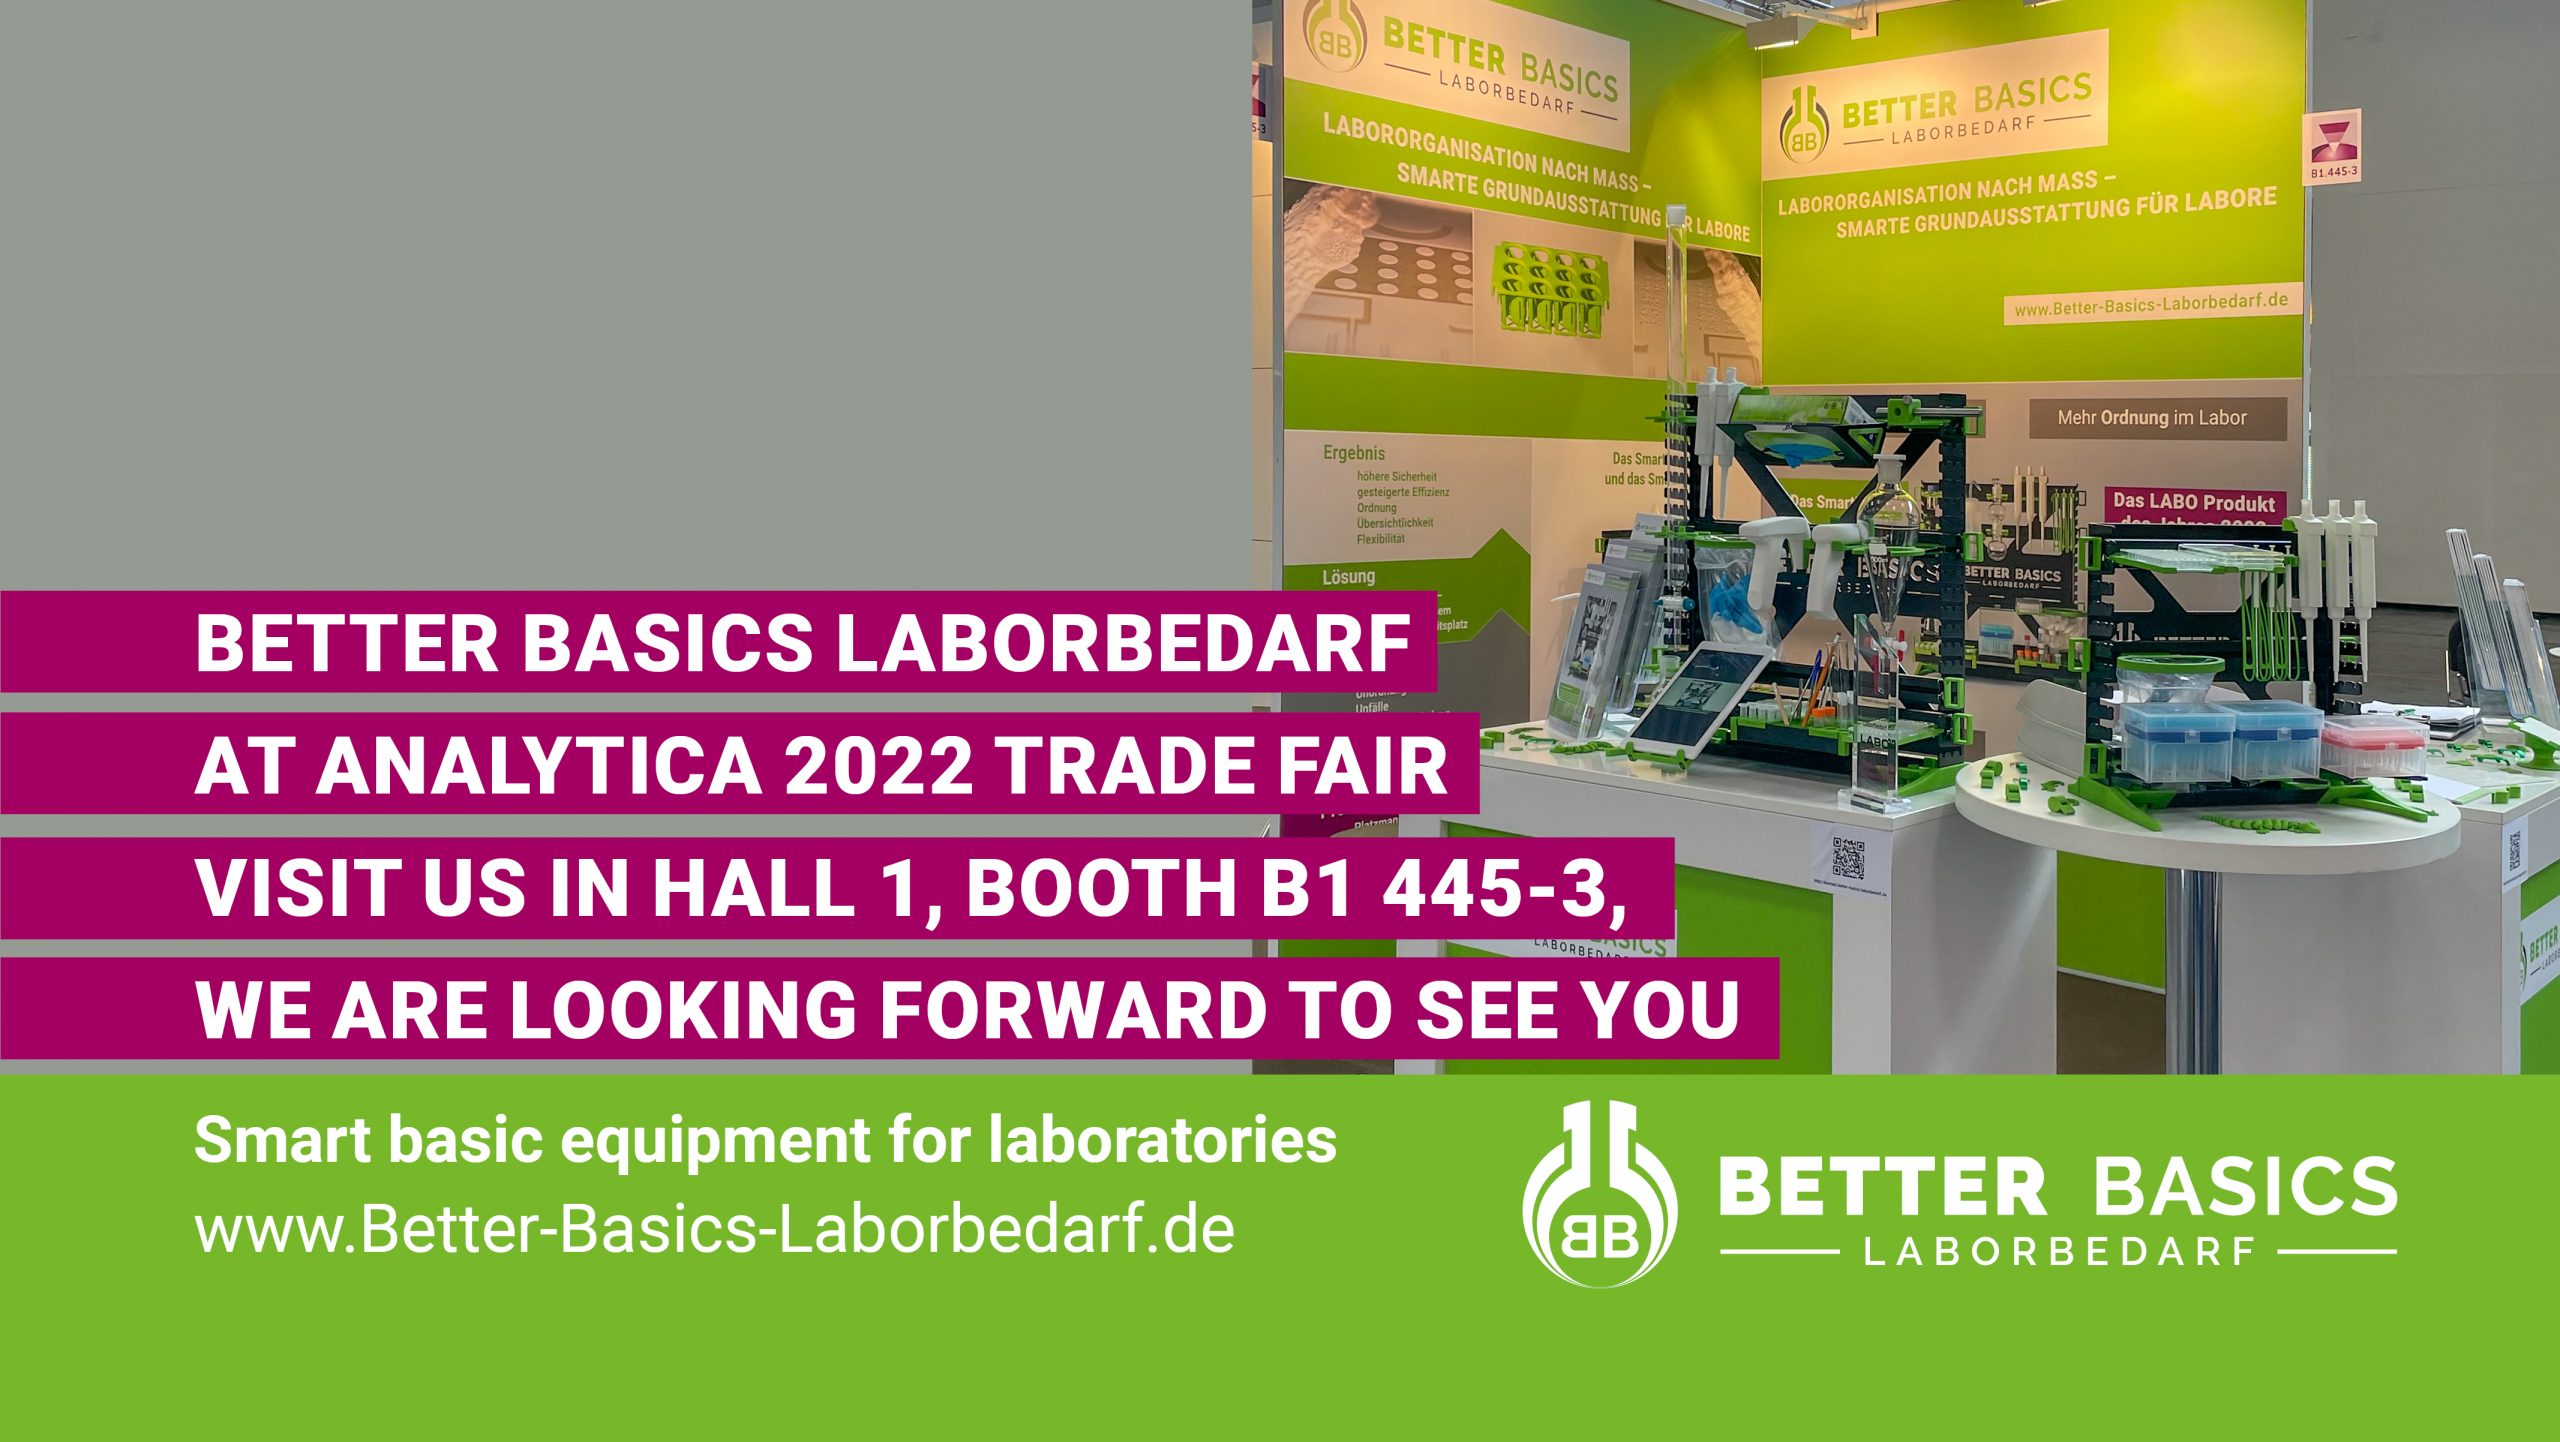 Better Basics Laborbedarf GmbH News Beitrag EN- Better Basics Laborbedarc at Analytica 2022 trade fair visit us in Hall 1, Booth B1 445-3, we are looking forward to see you